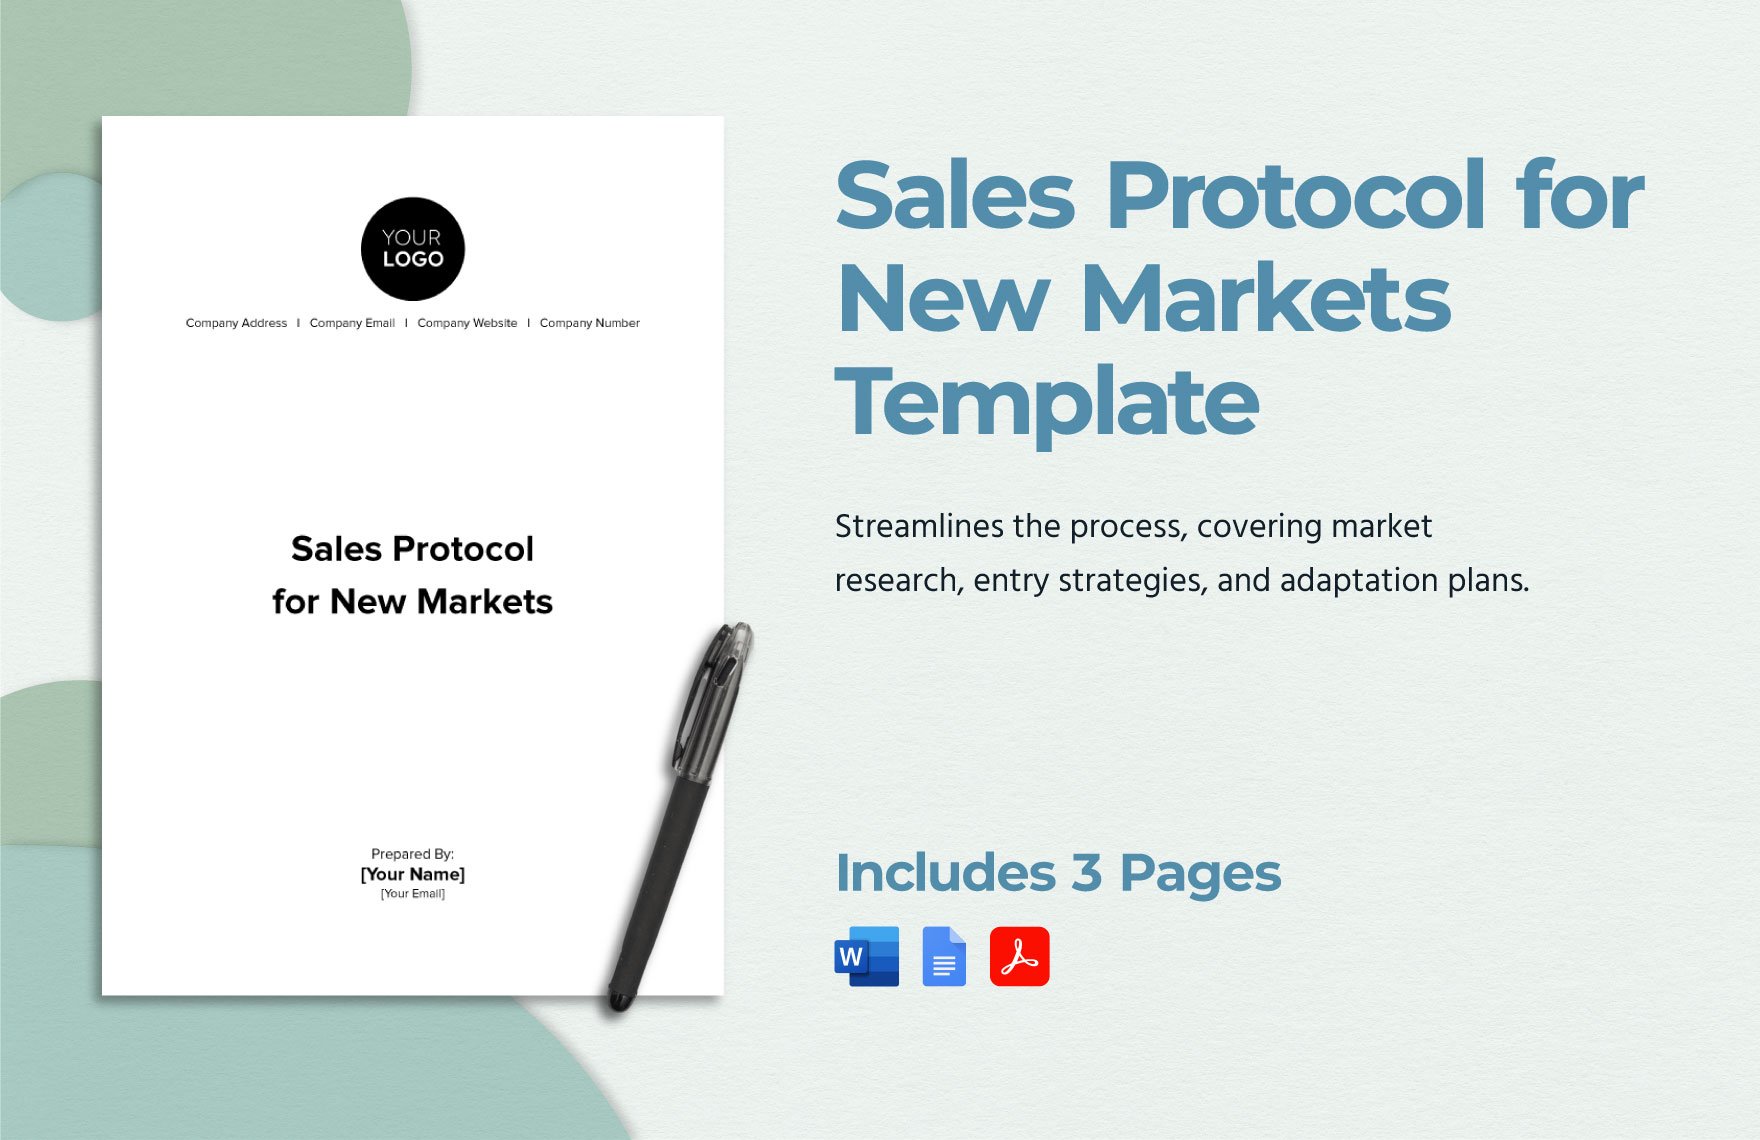 Sales Protocol for New Markets Template